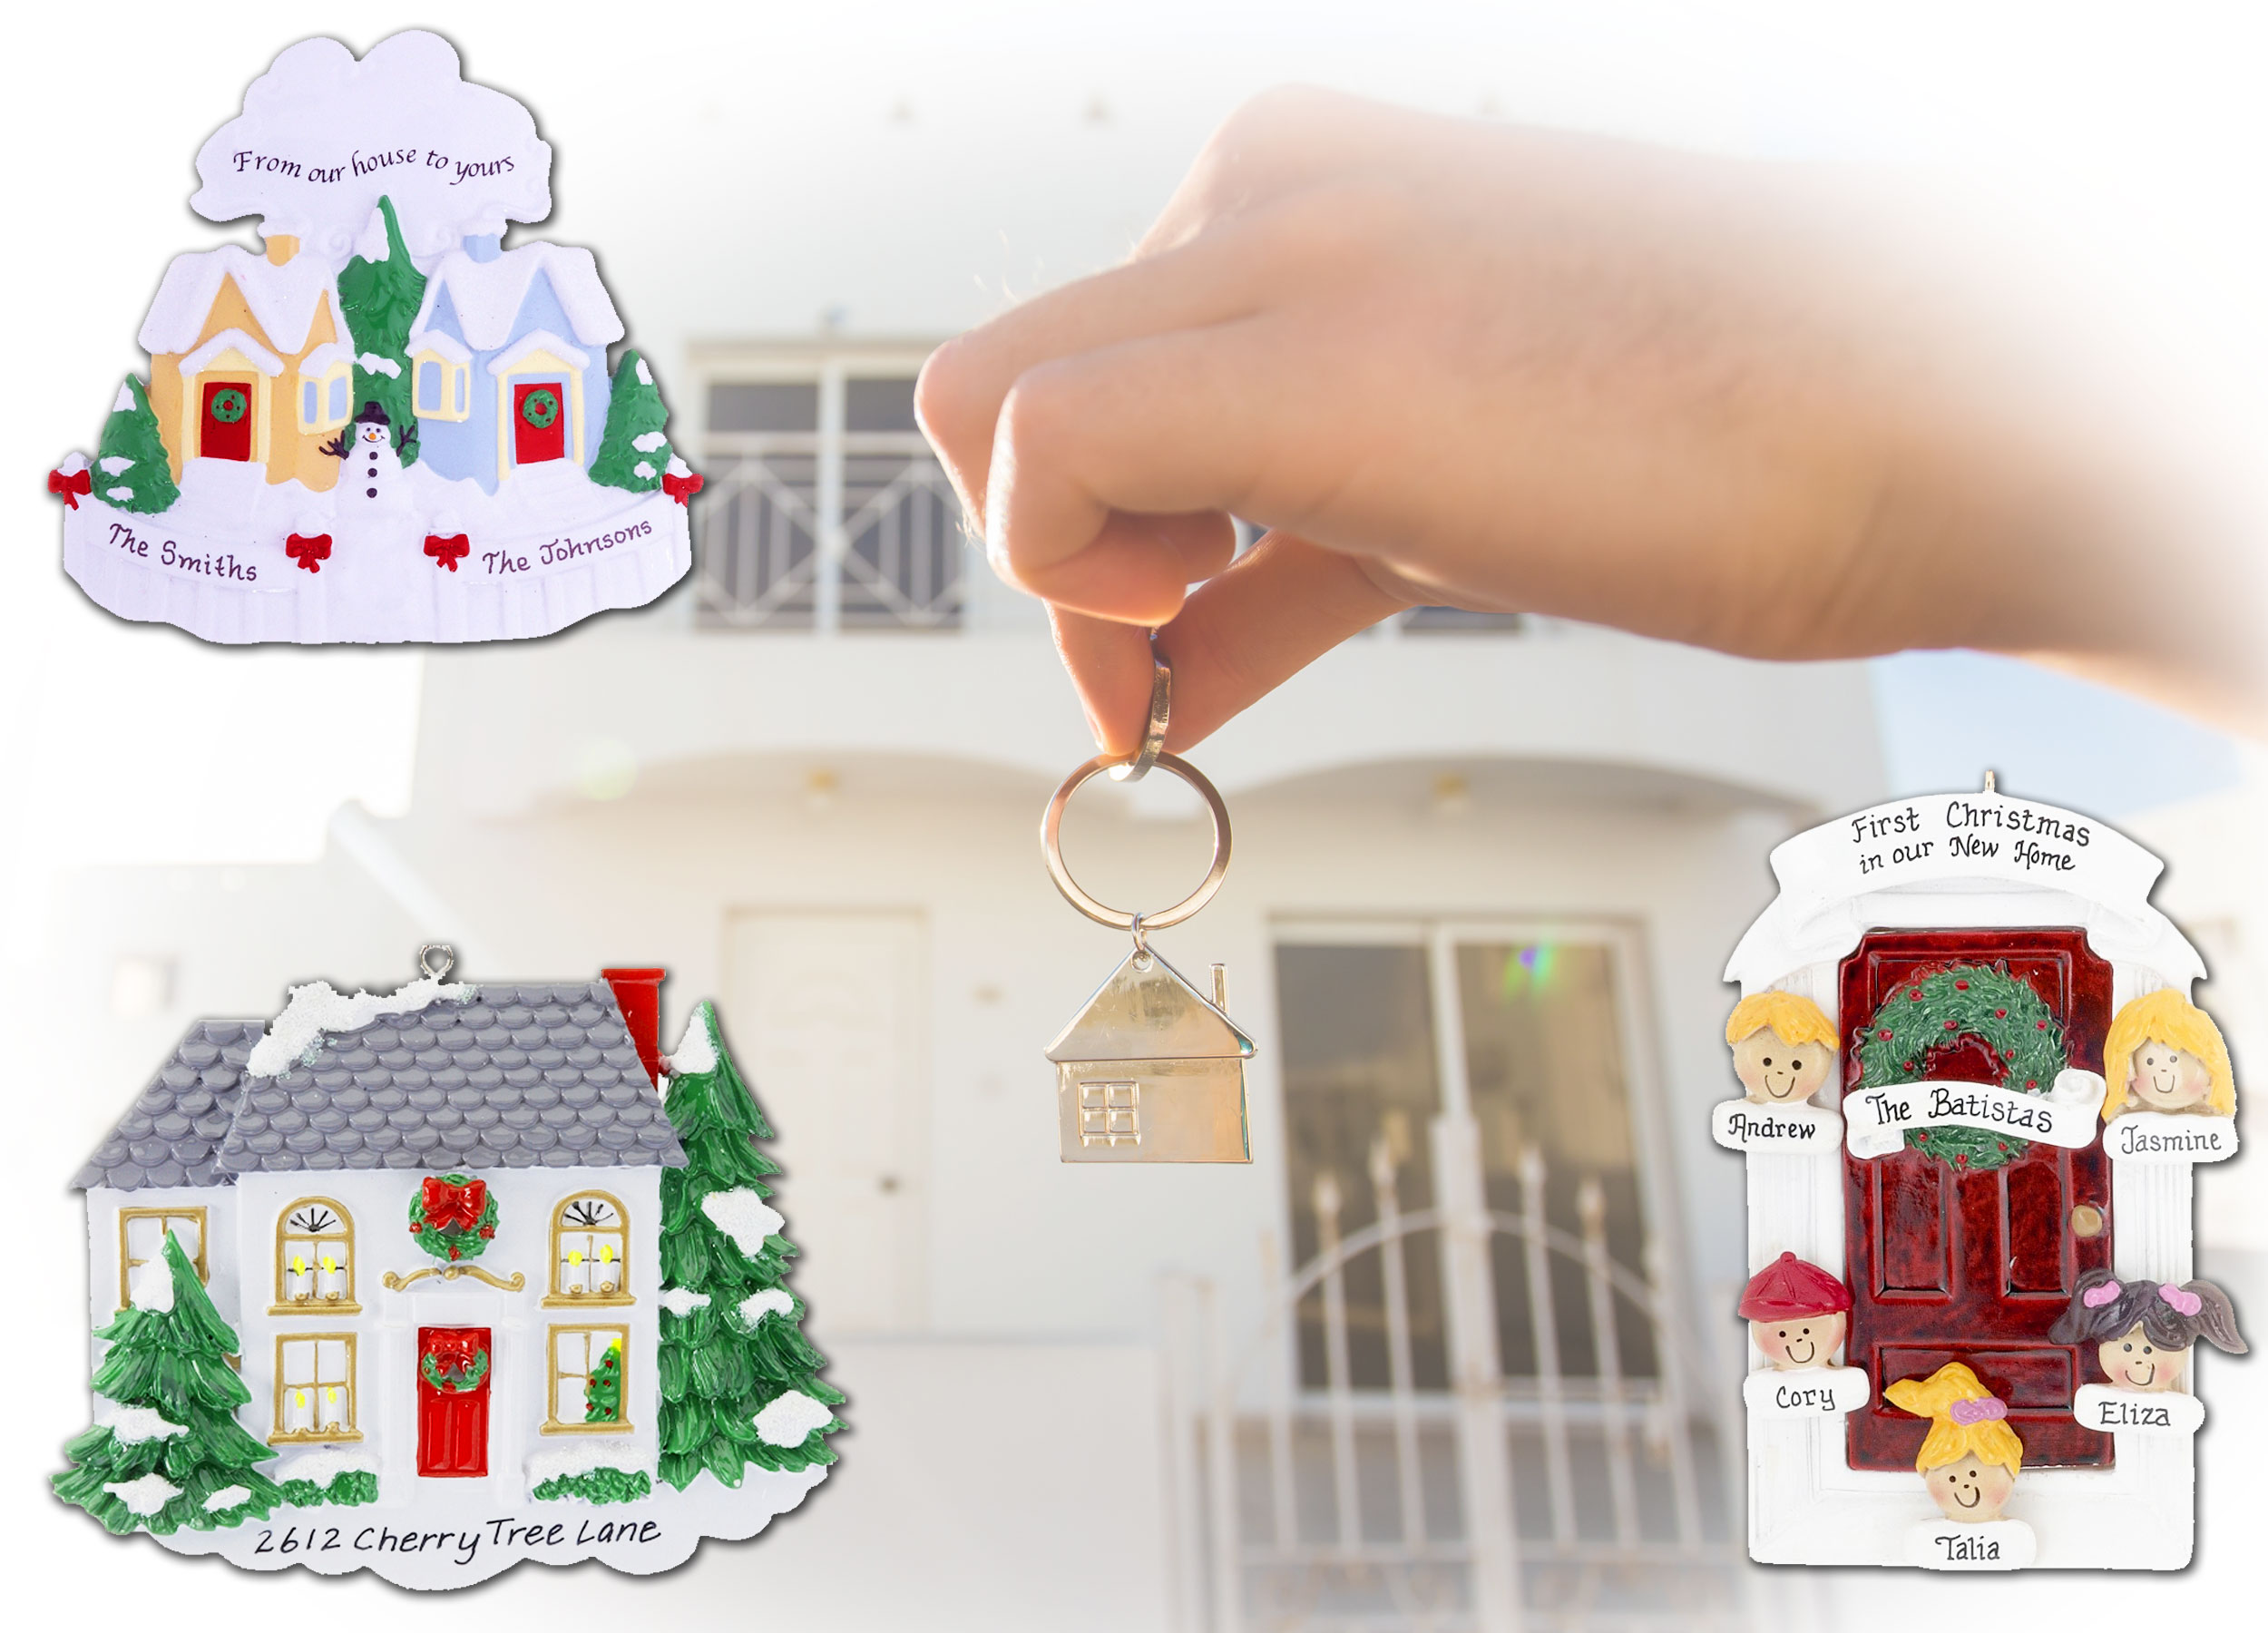 A new home is the perfect occasion to celebrate with a personalized ornament. | OrnamentShop.com